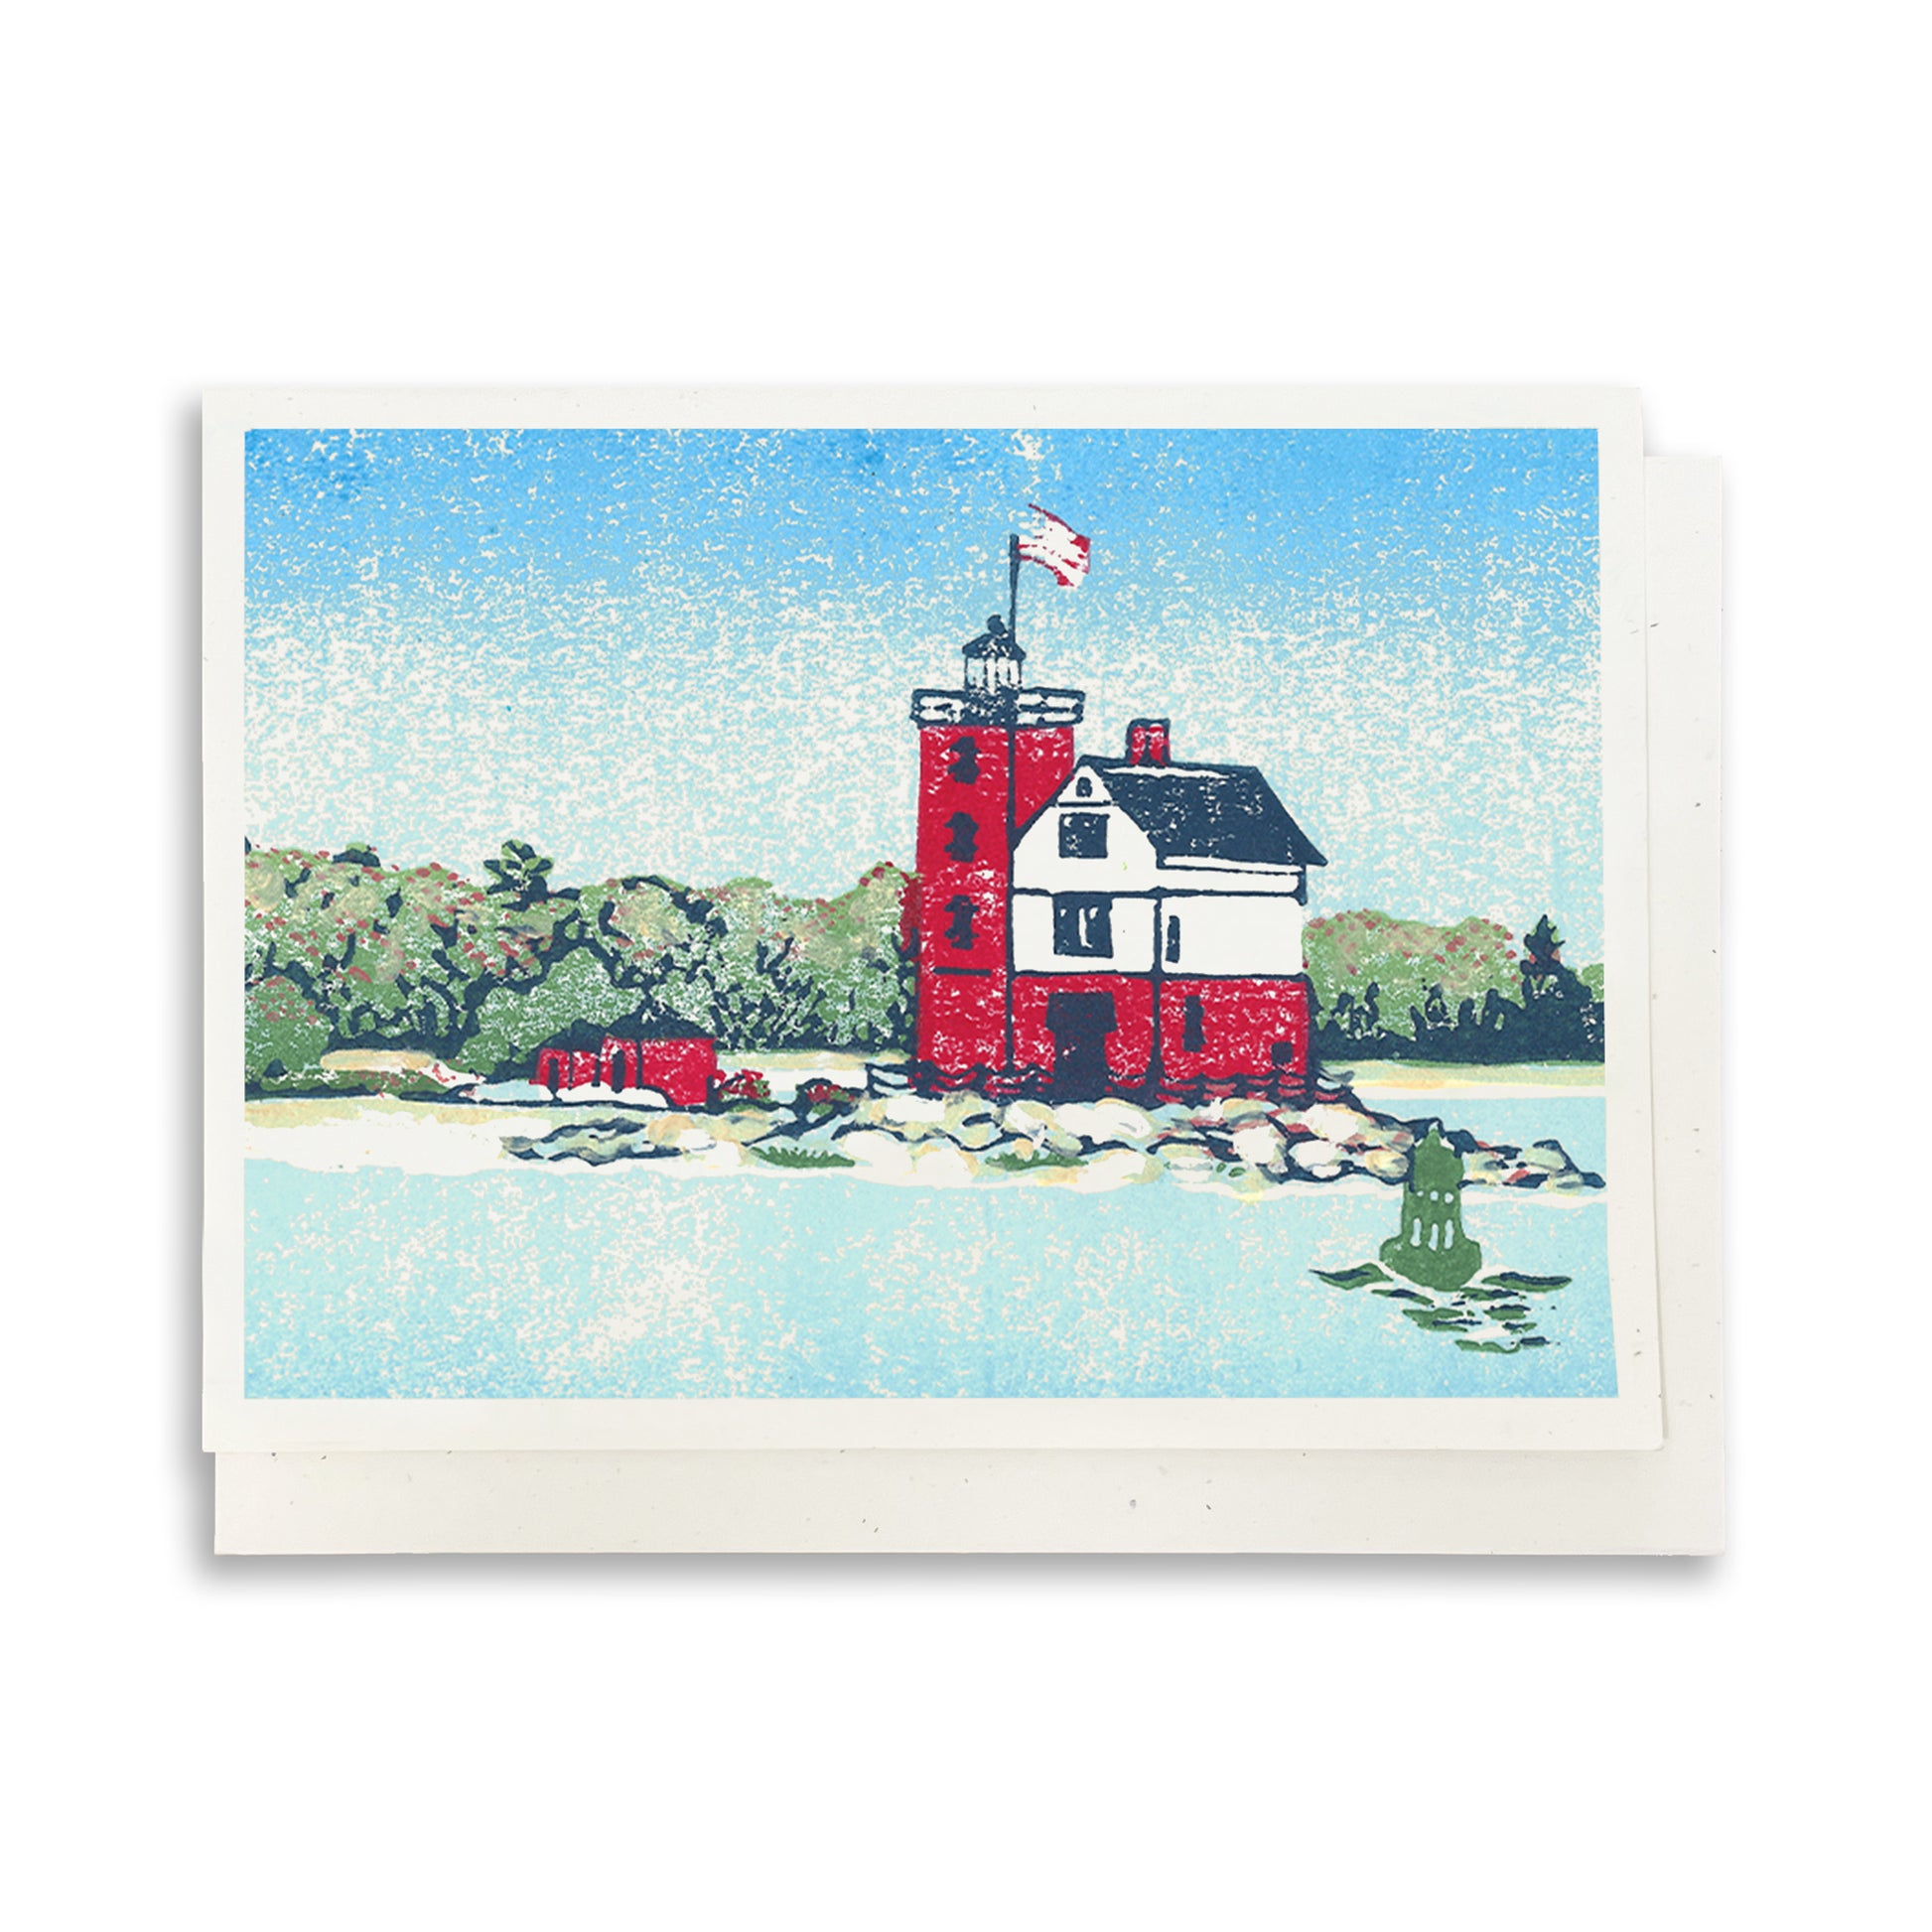 Round Island Light.  A casually elegant card featuring a digital reproduction of Natalia Wohletz’s Peninsula Prints block print design with the same title.